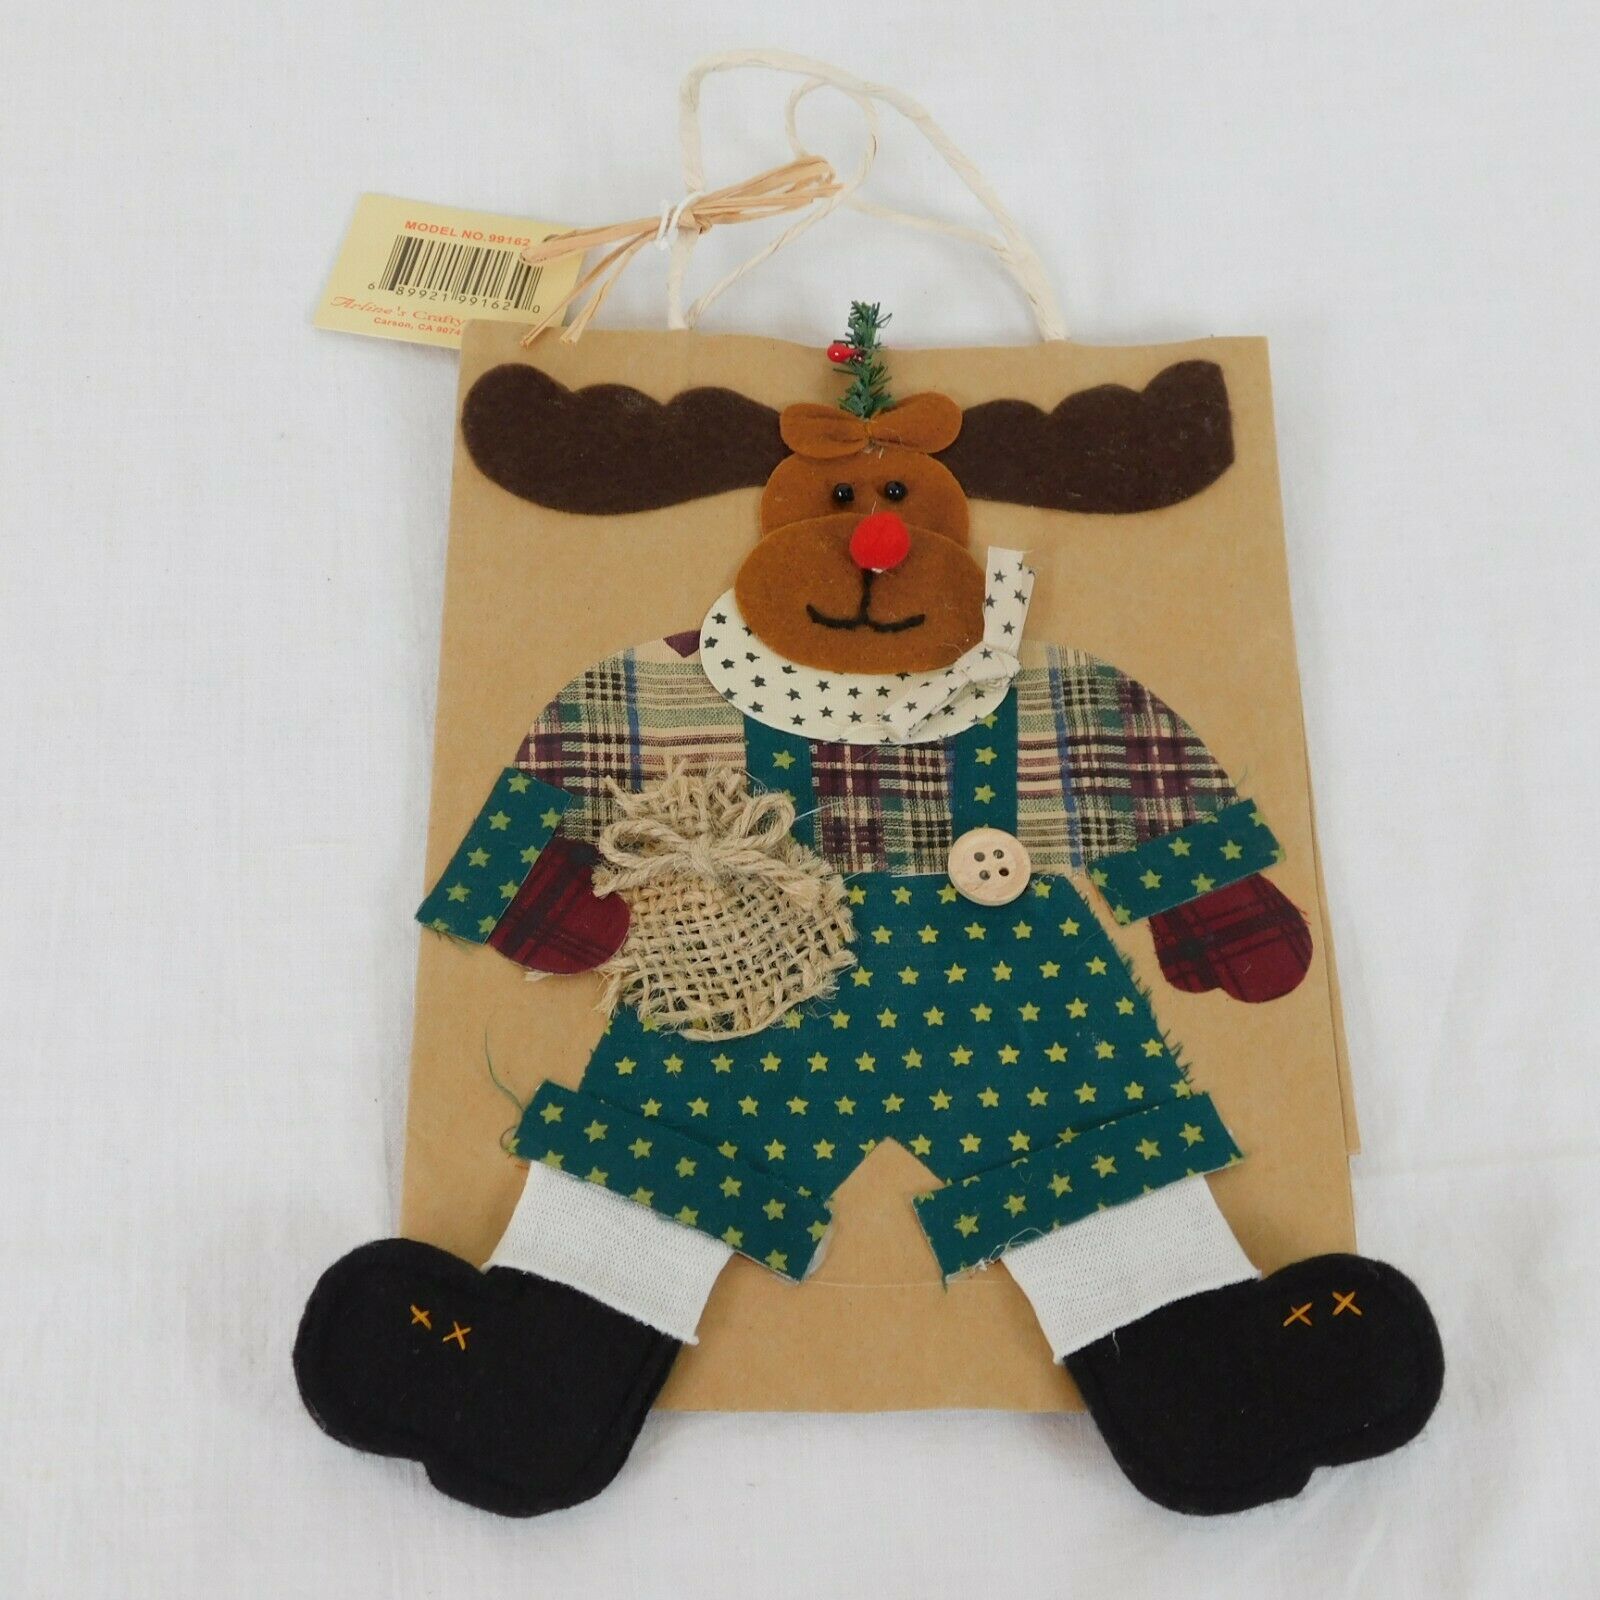 Primary image for Arline's Crafty Treasures Christmas Moose Paper Gift Bag Felt Fabric Red Nose